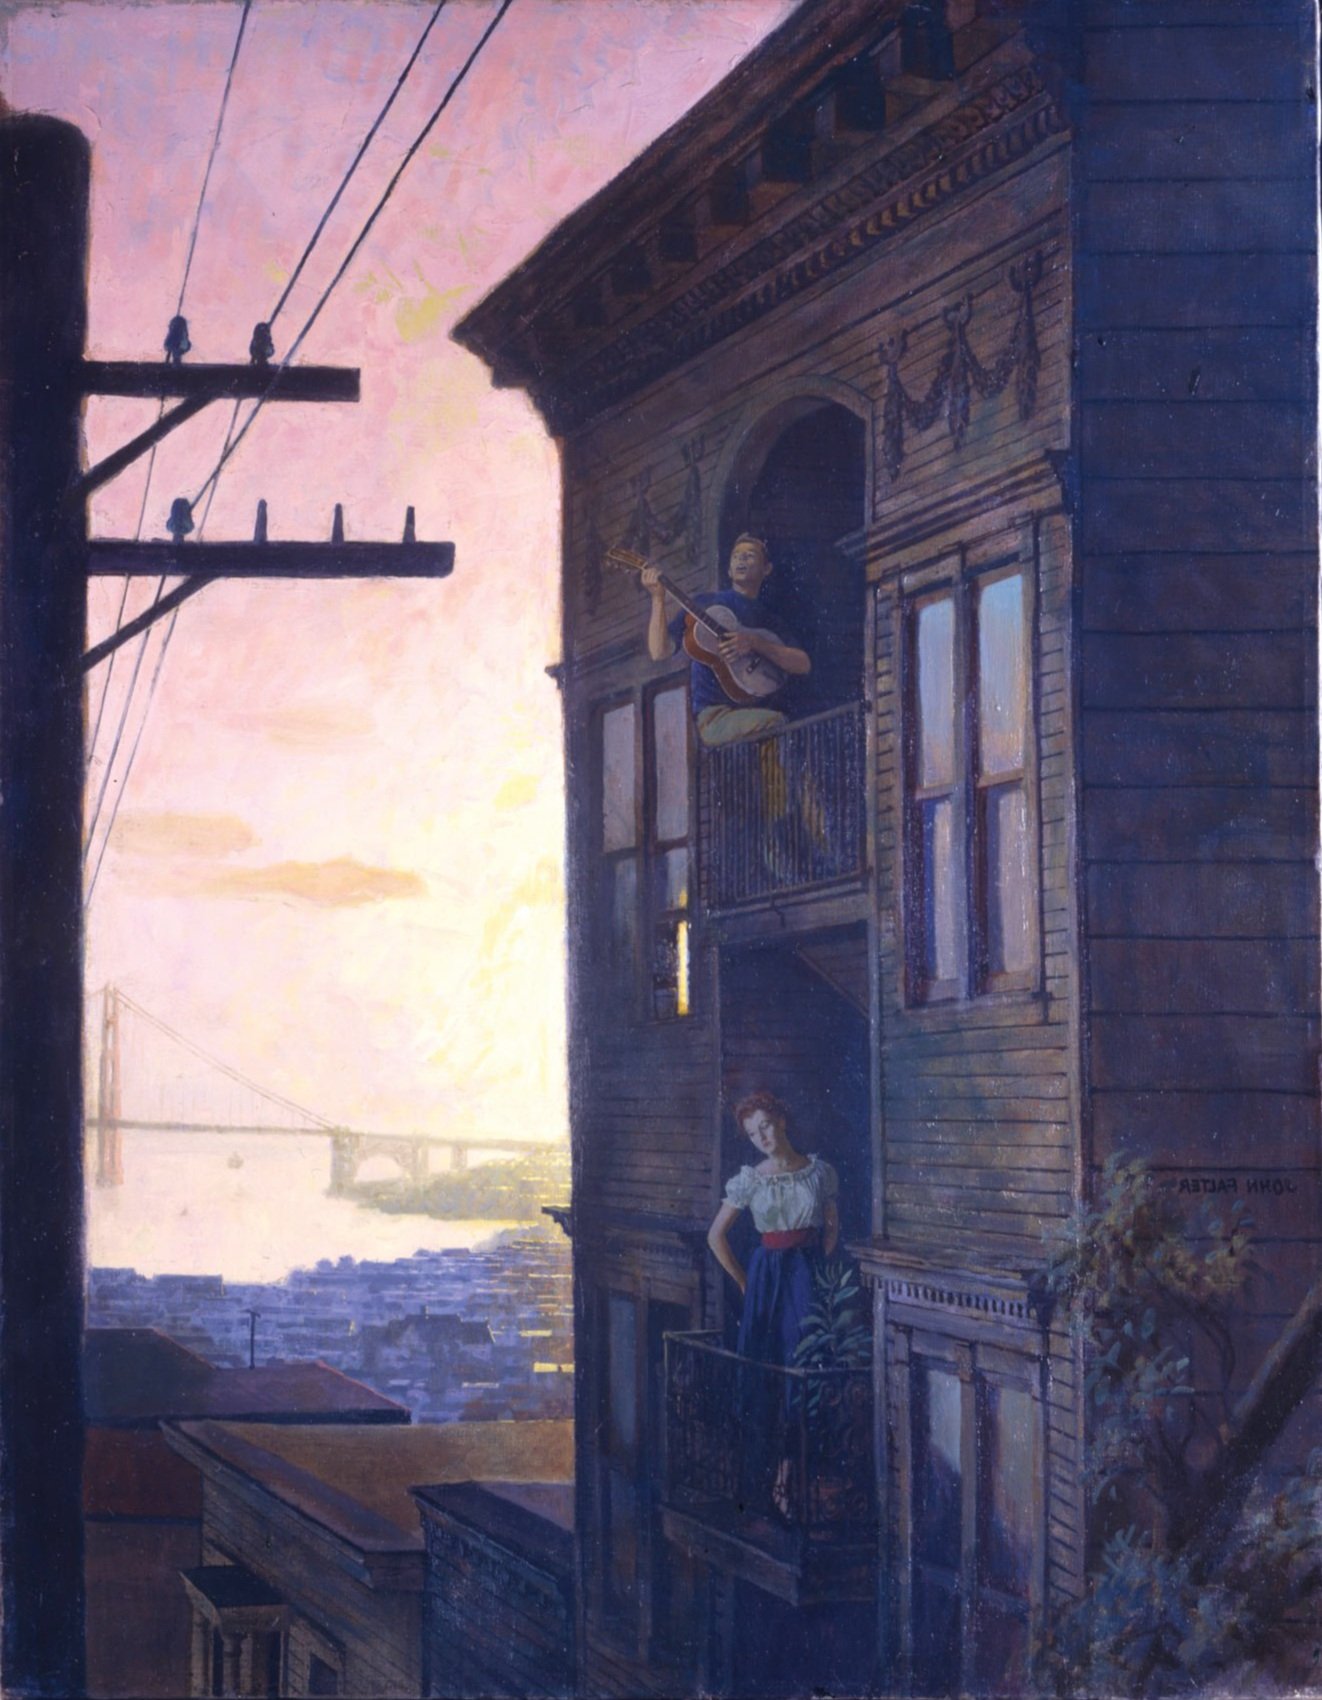   John Falter (1910-1982)   Man in Window Playing Guitar, San Francisco  1948, oil on canvas 27 1/4” x 21 1/2”, signed middle left Proposed cover for the  Saturday Evening Post  